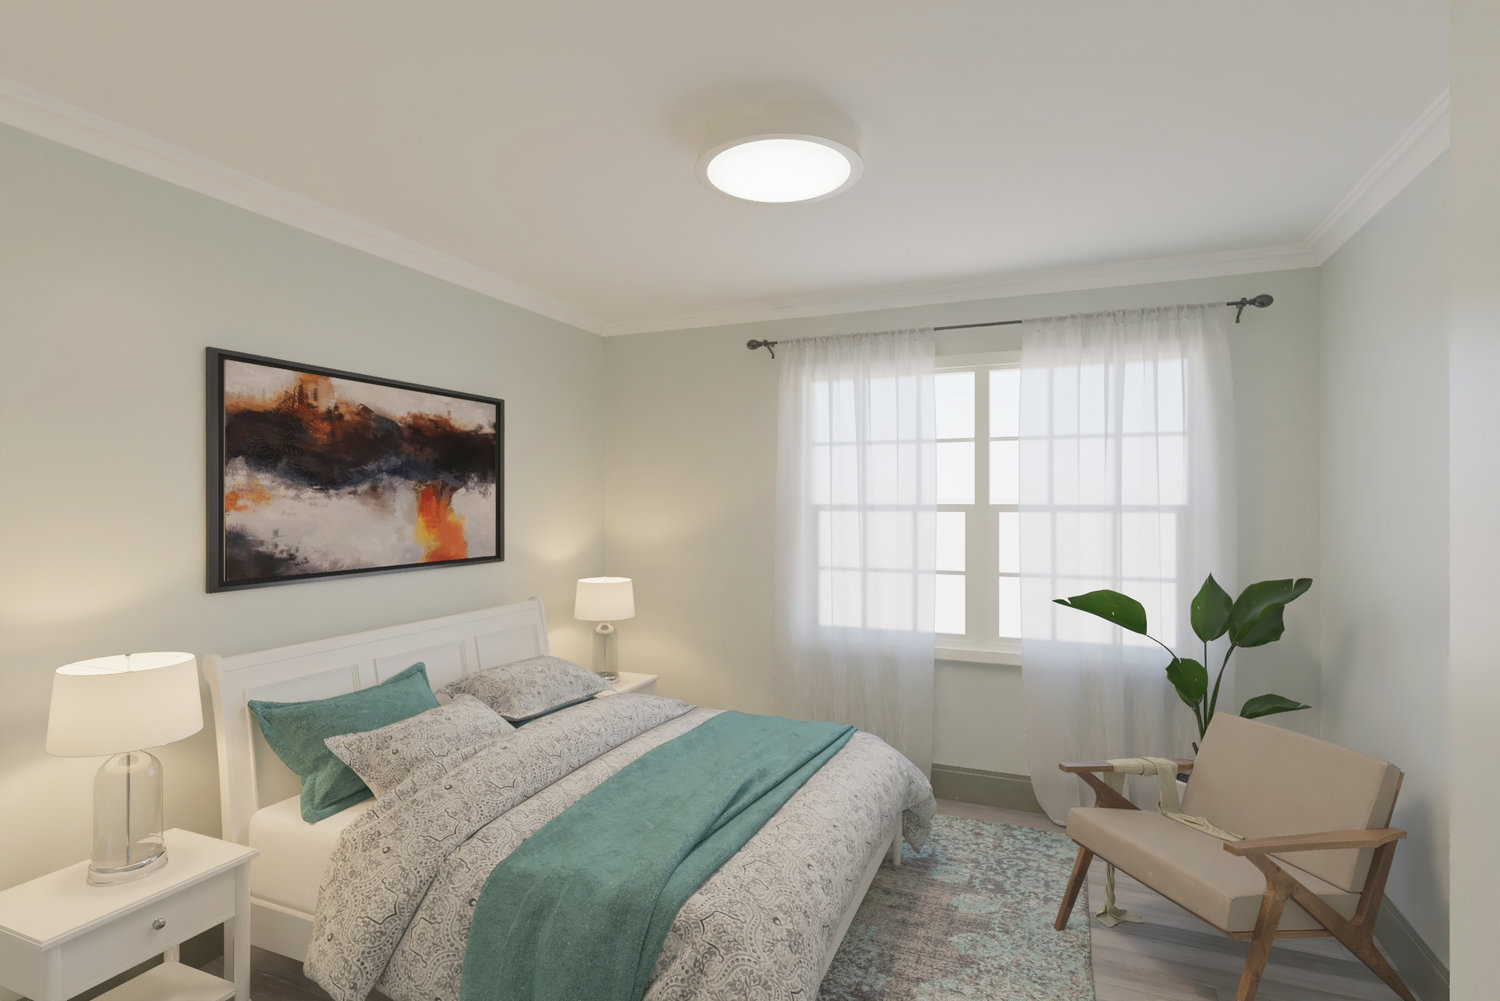 Phase 1 of The Villages at Stoney Creek includes 50 one-, two-, and three-bedroom apartments located next to Turning Stone at significantly below market rates and will be exclusively for new hourly employees relocating to the region. Pictured is a rendering of the apartment interior.